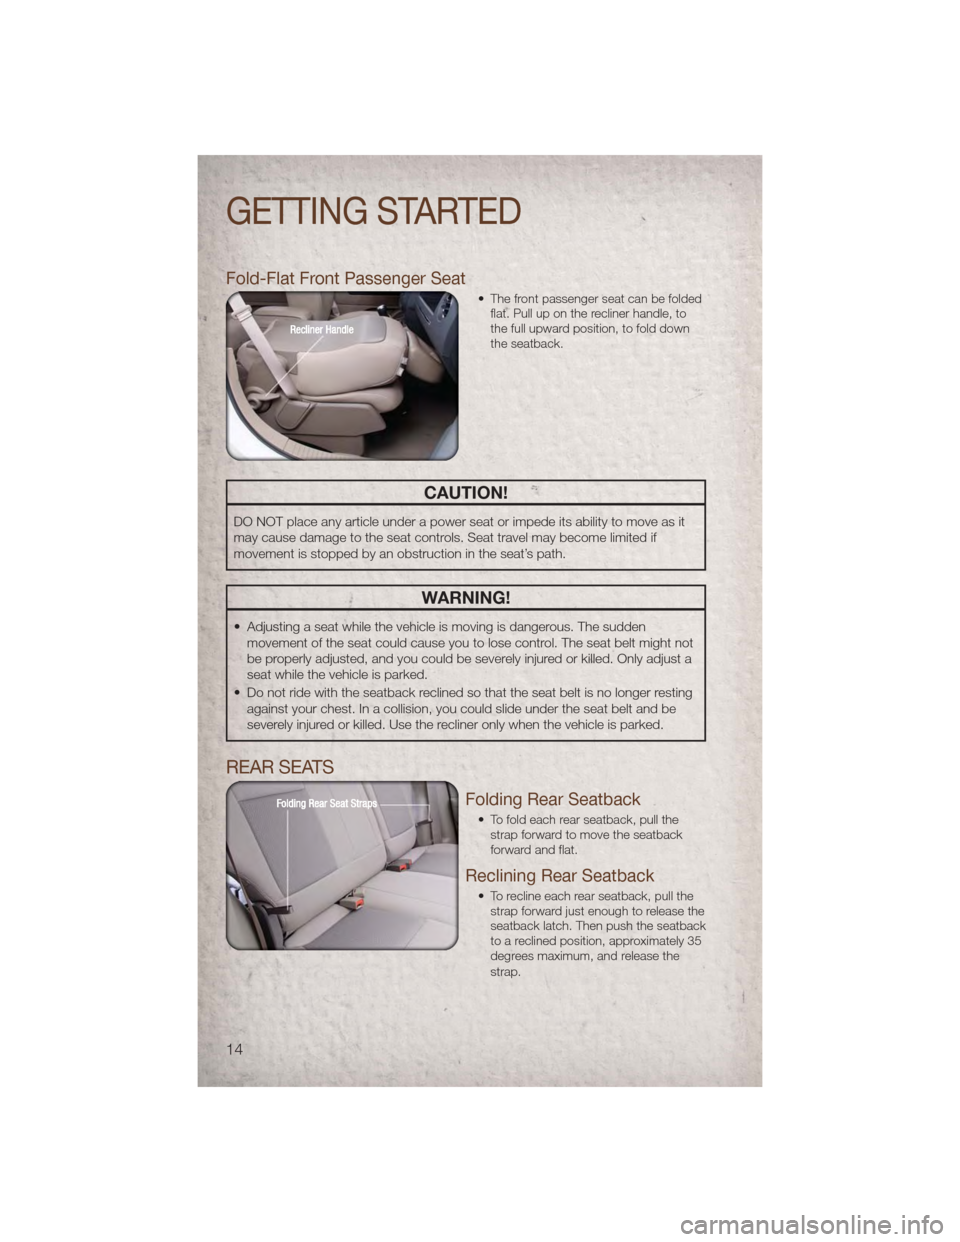 JEEP PATRIOT 2011 1.G User Guide Fold-Flat Front Passenger Seat
• The front passenger seat can be foldedflat. Pull up on the recliner handle, to
the full upward position, to fold down
the seatback.
CAUTION!
DO NOT place any article